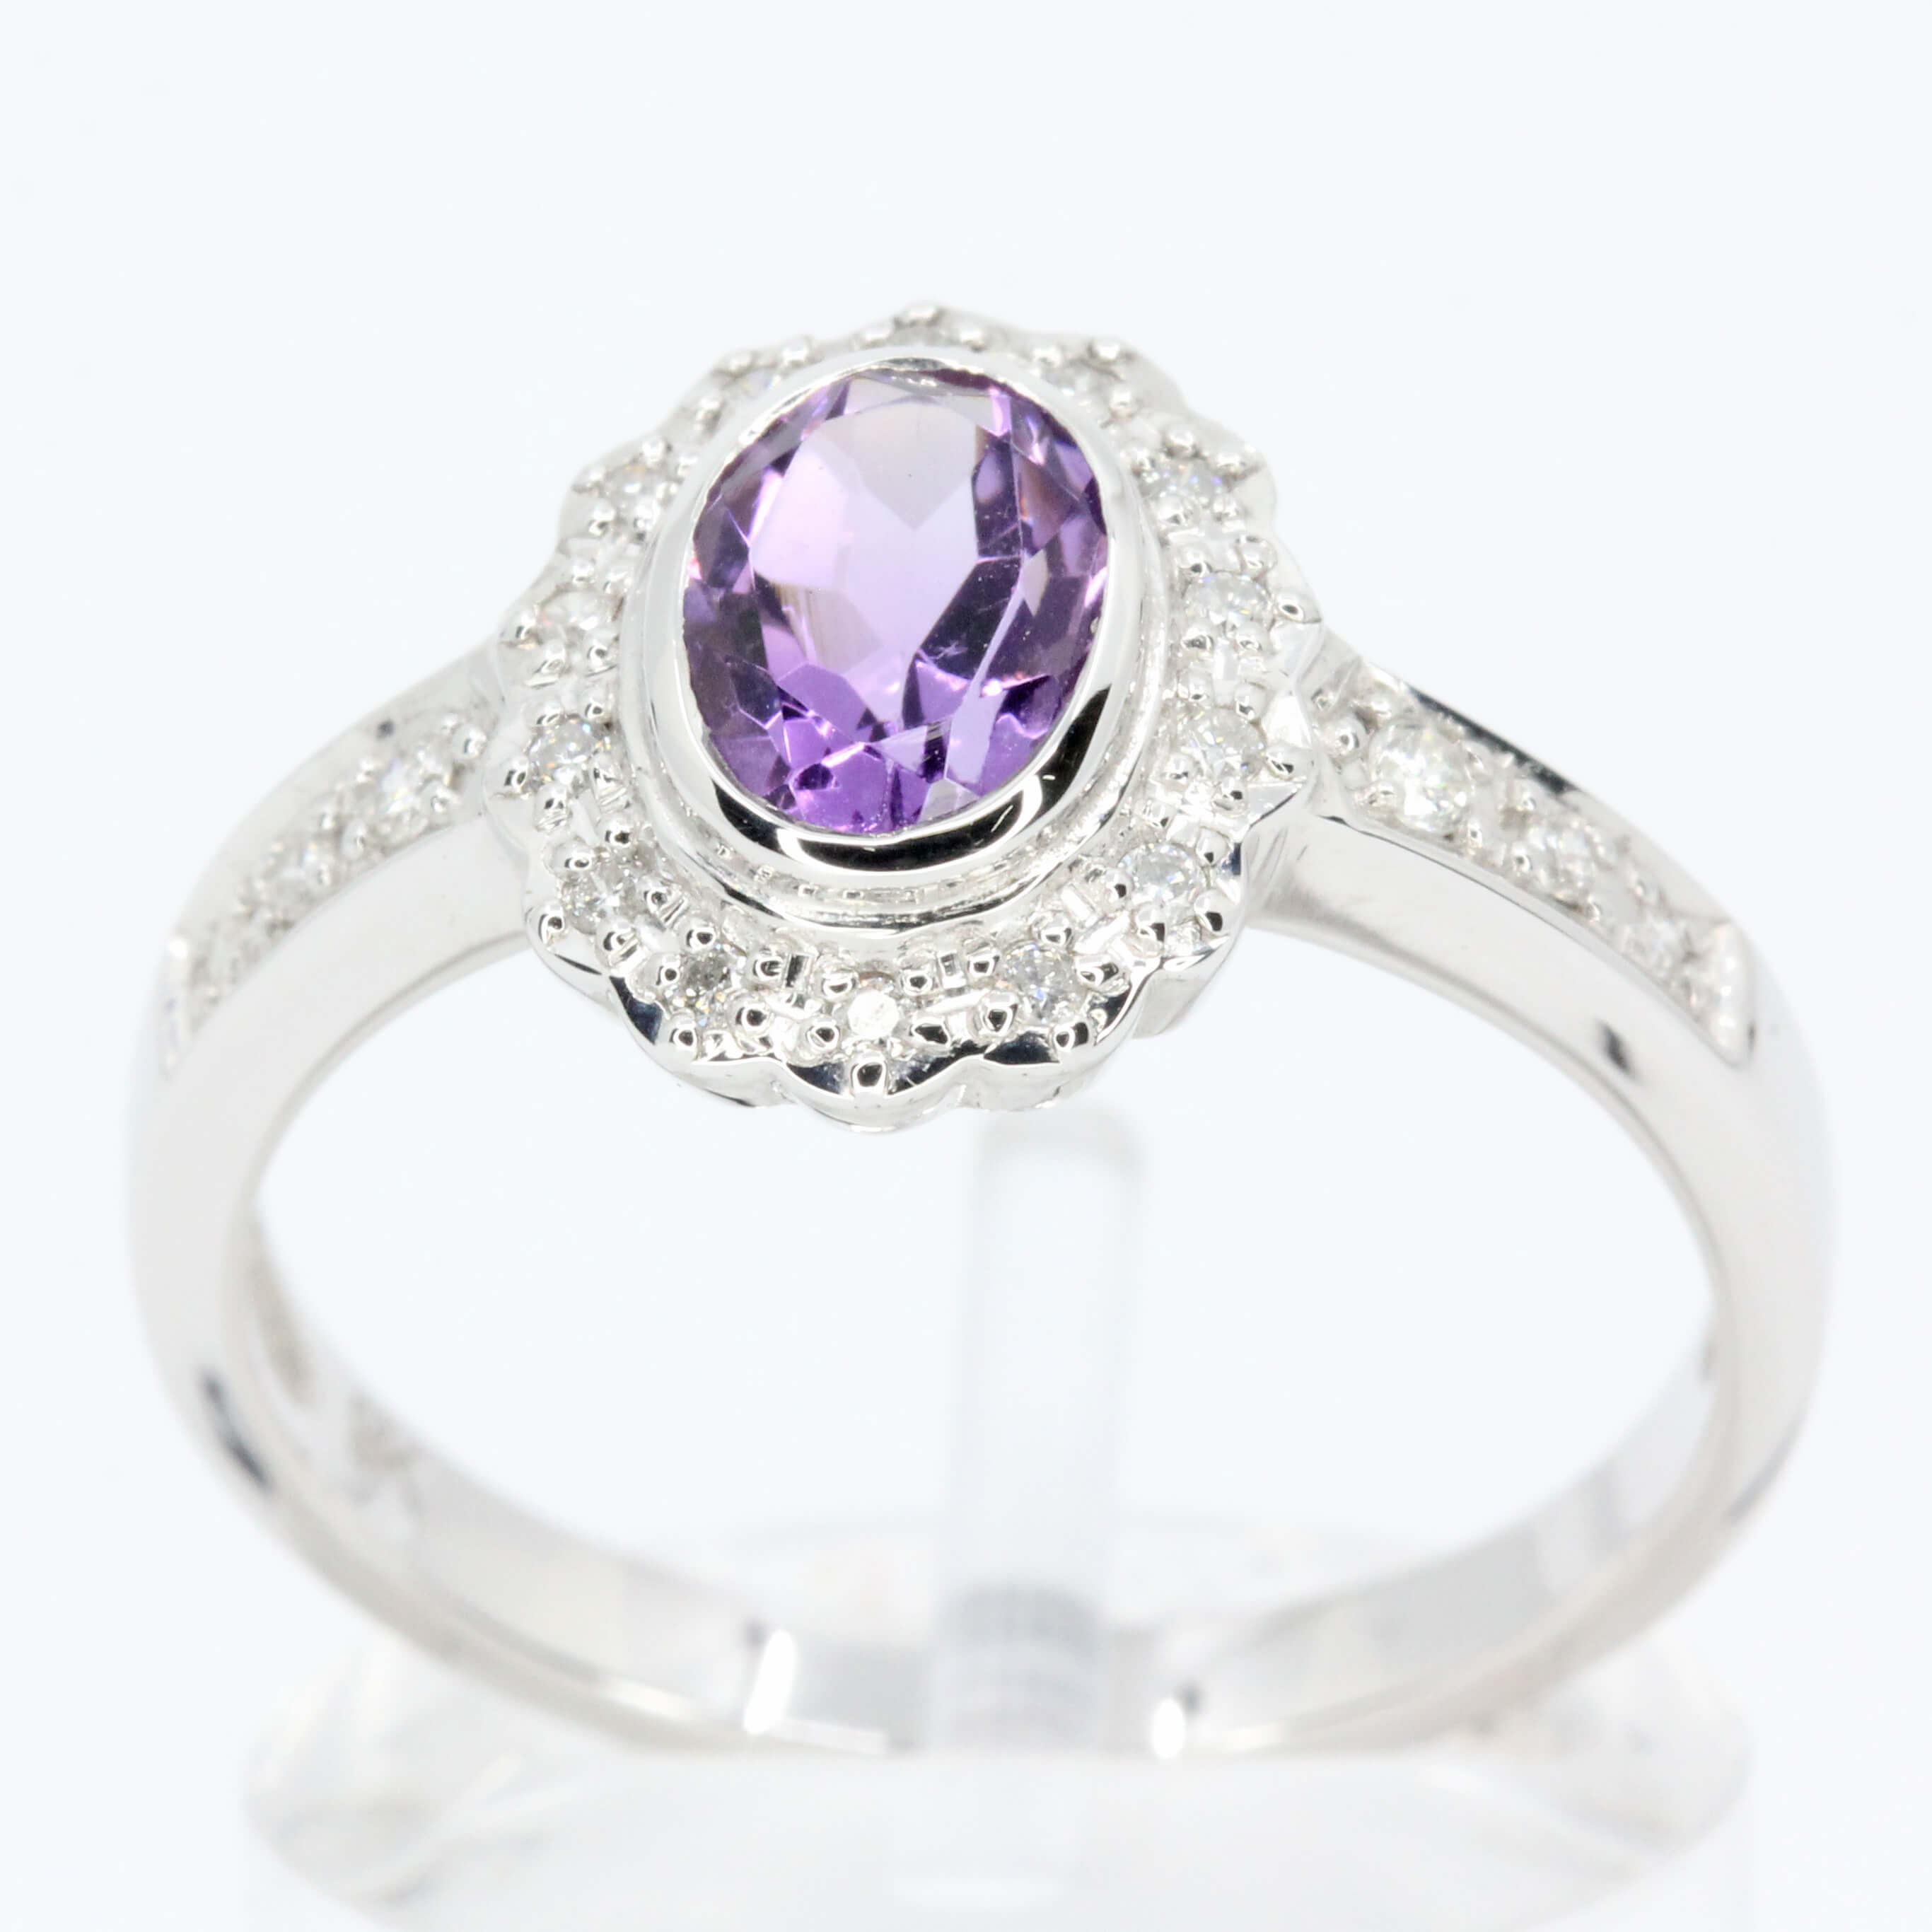 Oval Shape Amethyst Ring with Accents of Diamonds Set in